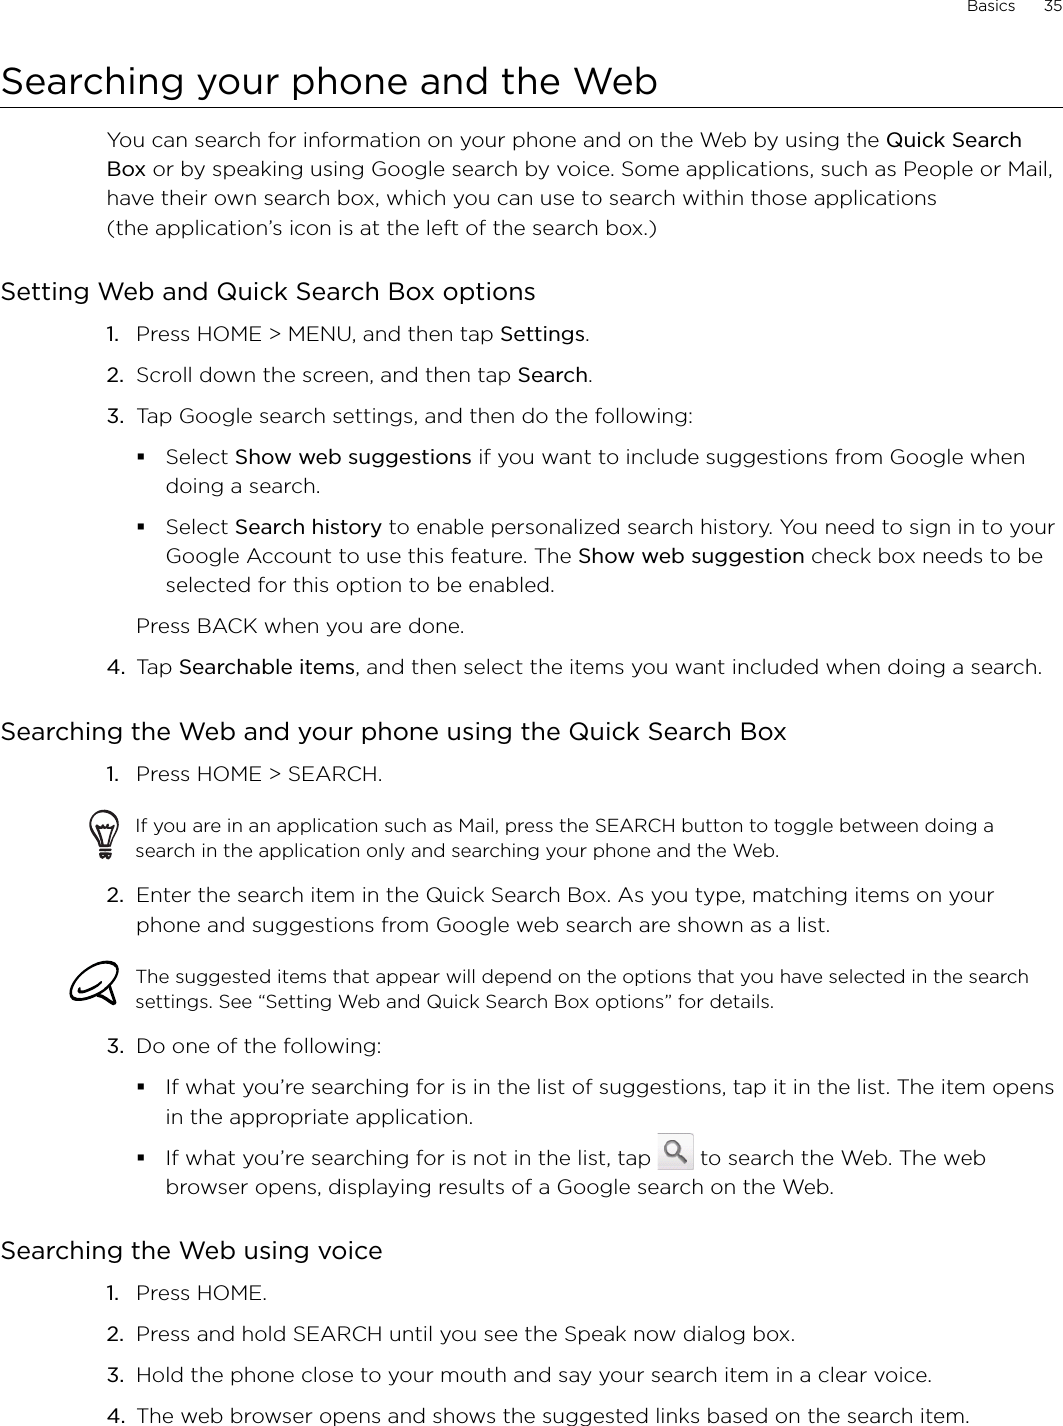 Basics      35Searching your phone and the WebYou can search for information on your phone and on the Web by using the Quick Search Box or by speaking using Google search by voice. Some applications, such as People or Mail, have their own search box, which you can use to search within those applications  (the application’s icon is at the left of the search box.)Setting Web and Quick Search Box optionsPress HOME &gt; MENU, and then tap Settings. Scroll down the screen, and then tap Search. Tap Google search settings, and then do the following:Select Show web suggestions if you want to include suggestions from Google when doing a search.Select Search history to enable personalized search history. You need to sign in to your Google Account to use this feature. The Show web suggestion check box needs to be selected for this option to be enabled. Press BACK when you are done. 4.  Tap Searchable items, and then select the items you want included when doing a search. Searching the Web and your phone using the Quick Search BoxPress HOME &gt; SEARCH. If you are in an application such as Mail, press the SEARCH button to toggle between doing a search in the application only and searching your phone and the Web. 2.  Enter the search item in the Quick Search Box. As you type, matching items on your phone and suggestions from Google web search are shown as a list.The suggested items that appear will depend on the options that you have selected in the search settings. See “Setting Web and Quick Search Box options” for details. 3.  Do one of the following:If what you’re searching for is in the list of suggestions, tap it in the list. The item opens in the appropriate application.If what you’re searching for is not in the list, tap   to search the Web. The web browser opens, displaying results of a Google search on the Web.Searching the Web using voicePress HOME. Press and hold SEARCH until you see the Speak now dialog box.Hold the phone close to your mouth and say your search item in a clear voice.The web browser opens and shows the suggested links based on the search item. 1.2.3.1.1.2.3.4.